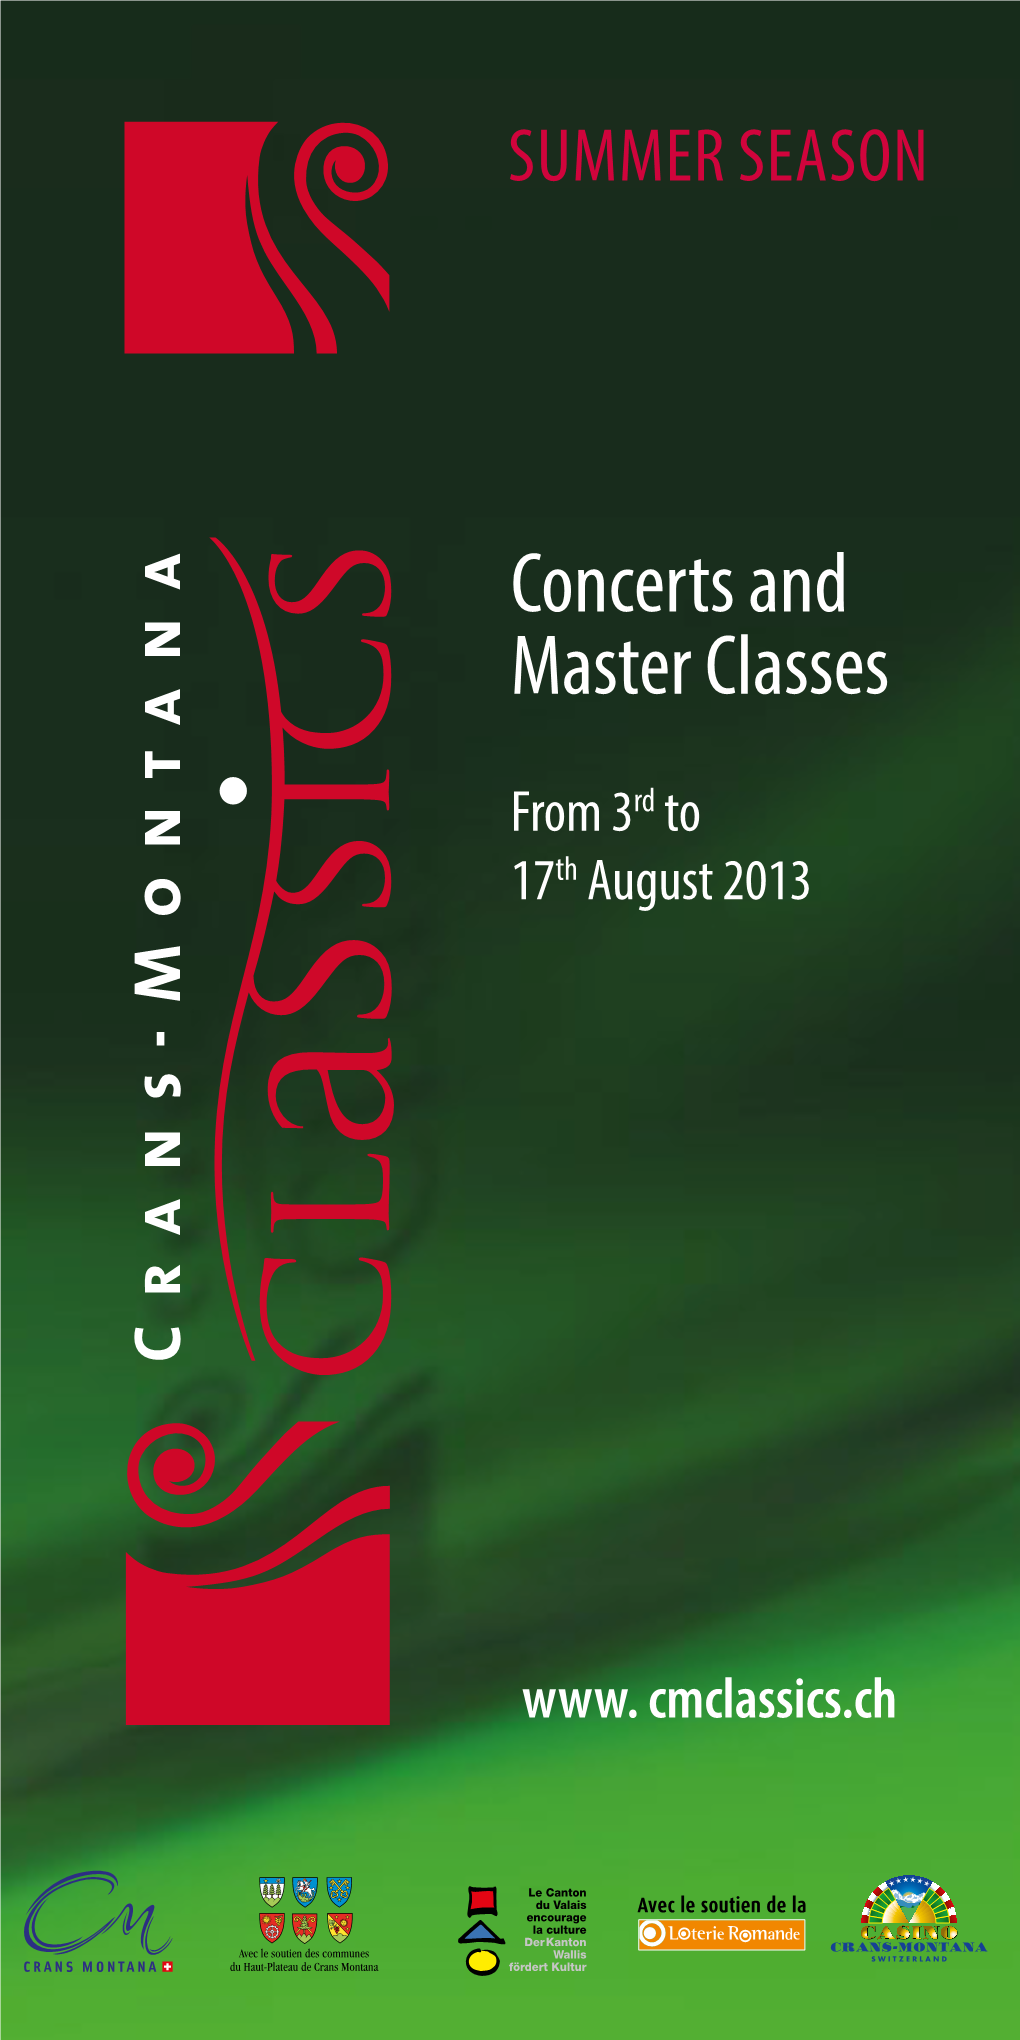 Concerts and Master Classes